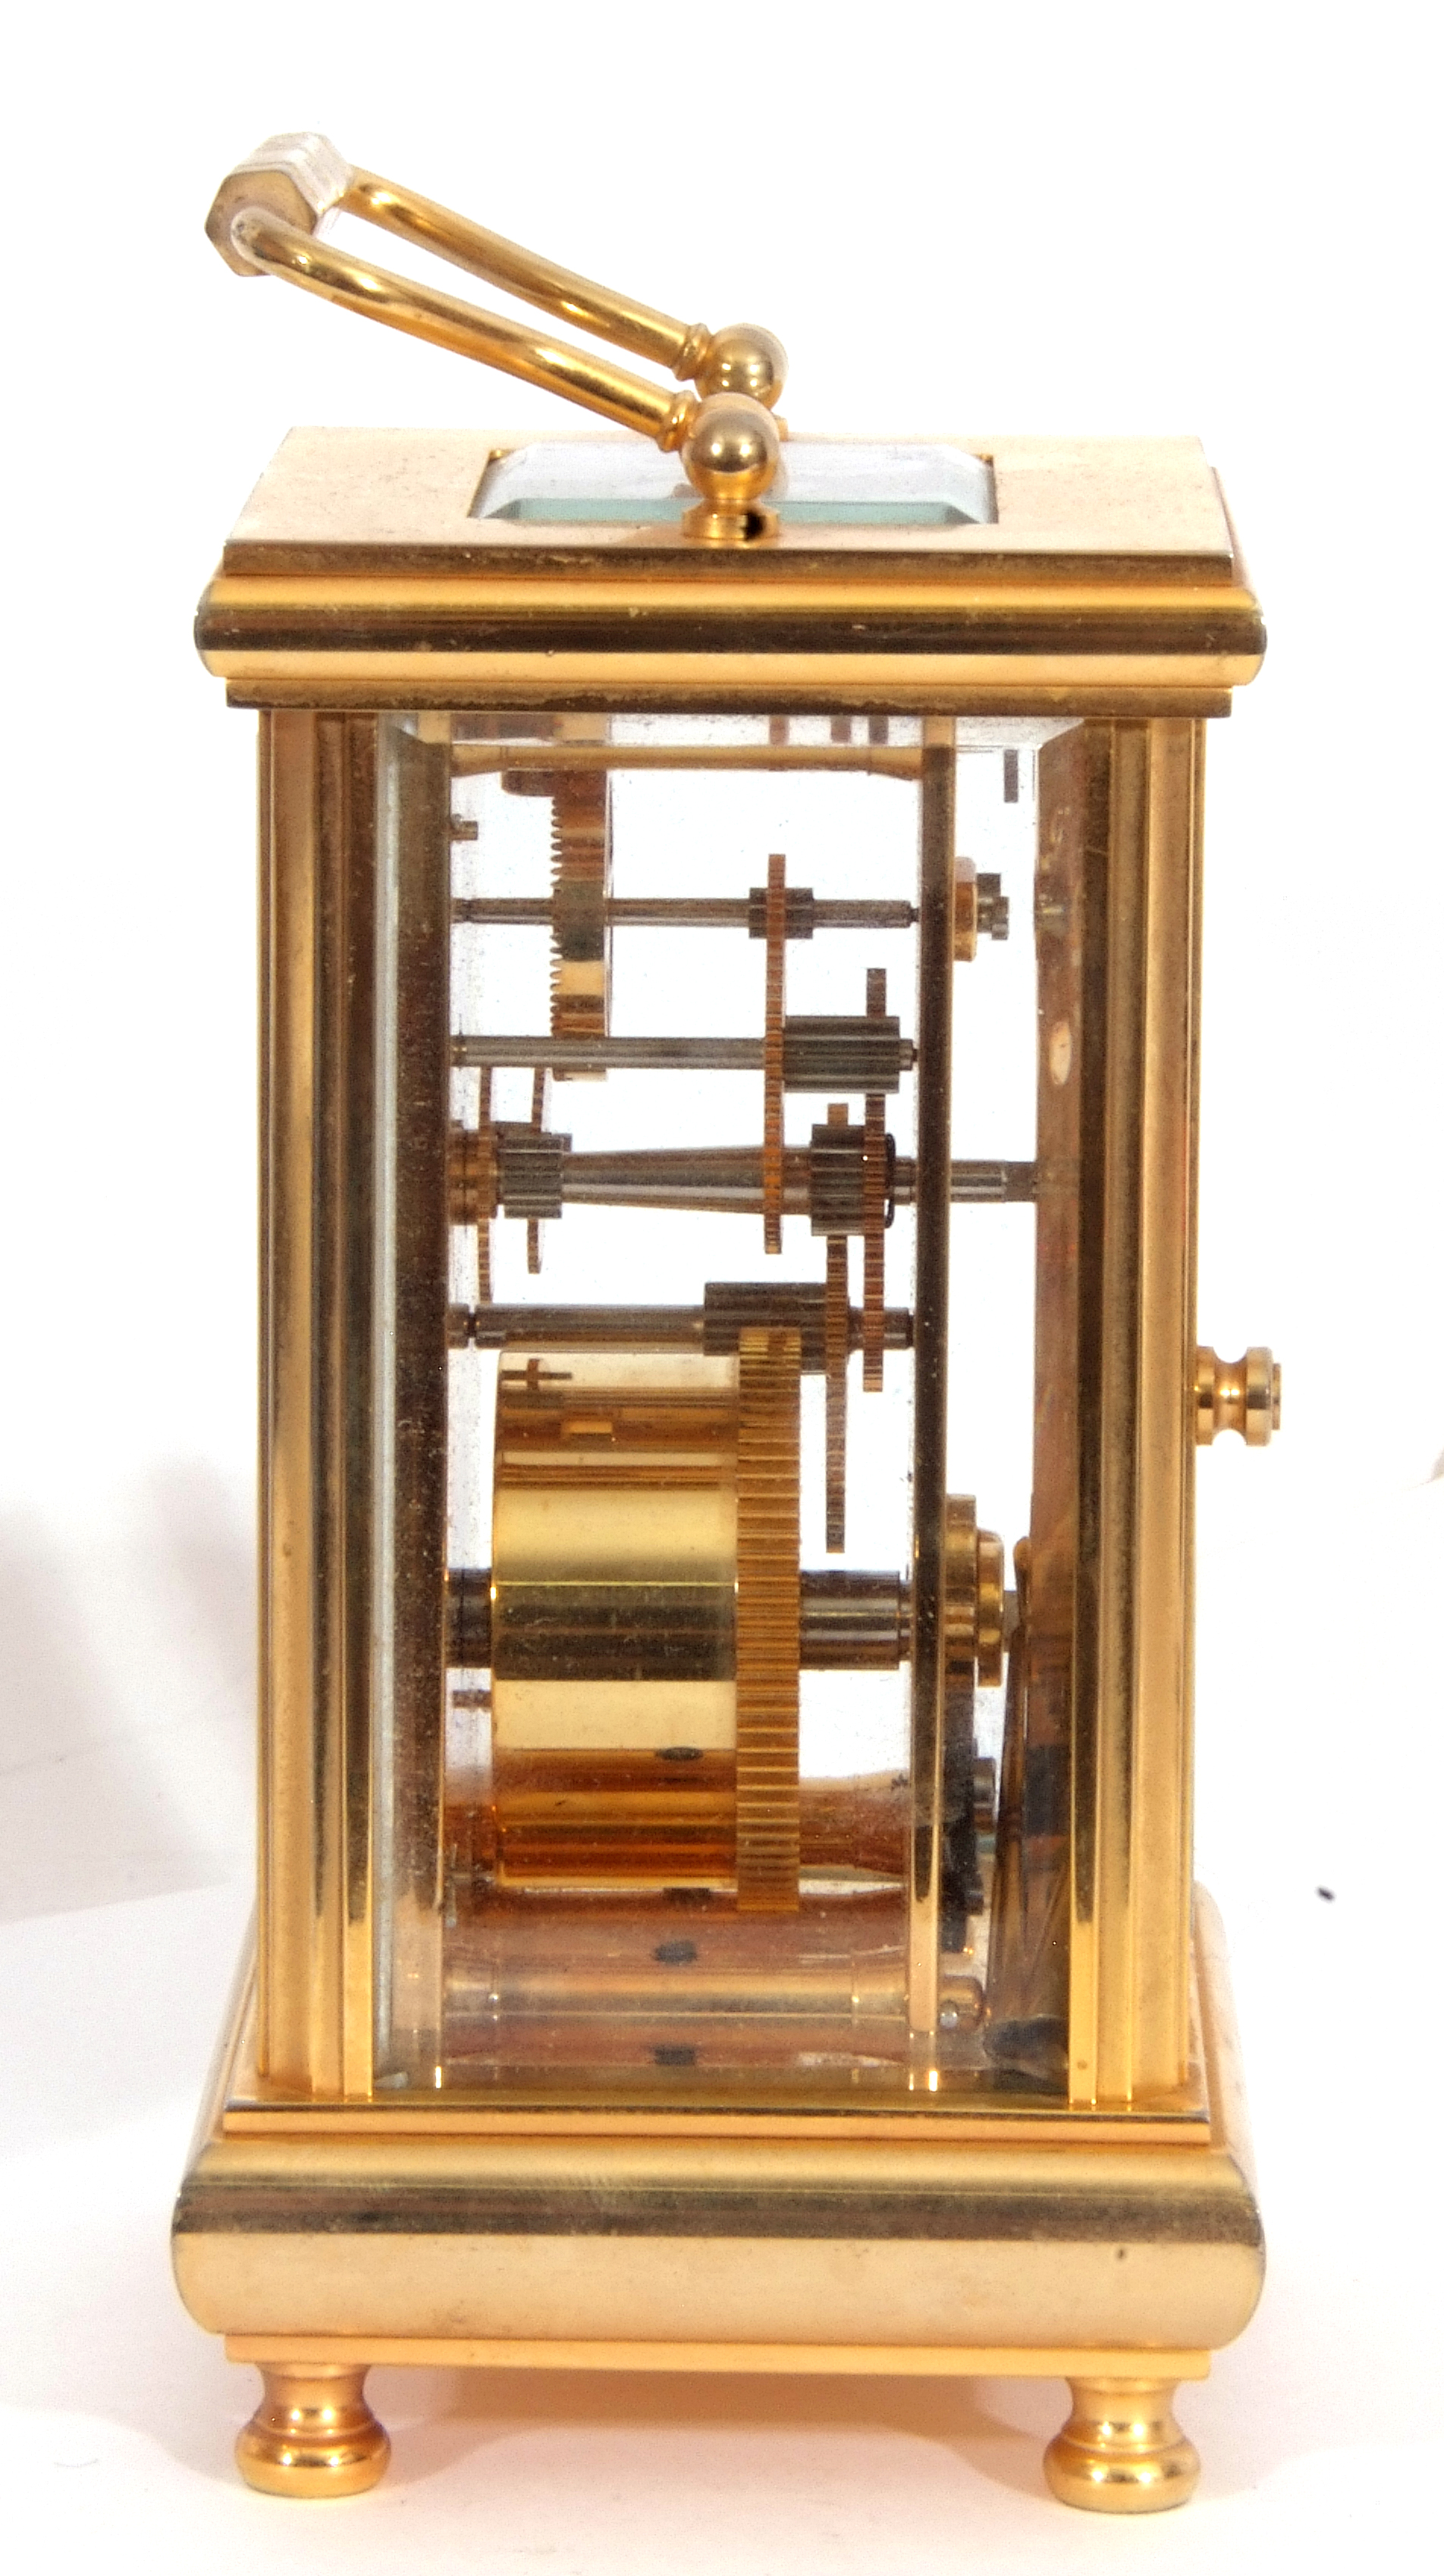 Mixed Lot: Thomas Braithwaite of London brass cased carriage clock timepiece, Roman numerals, - Image 5 of 14